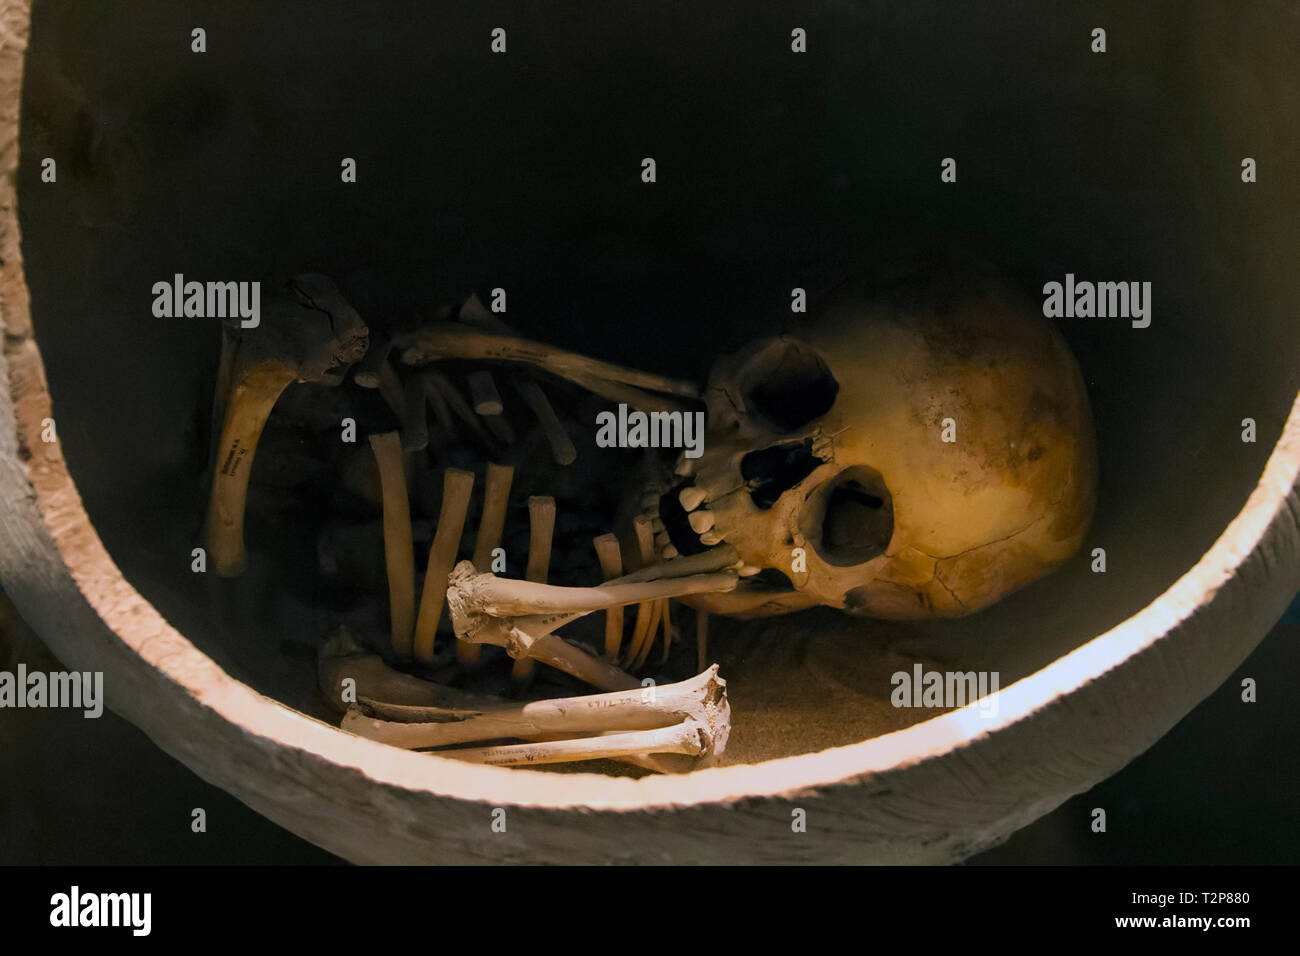 Skull of an ancient burial of mexican natives Stock Photo